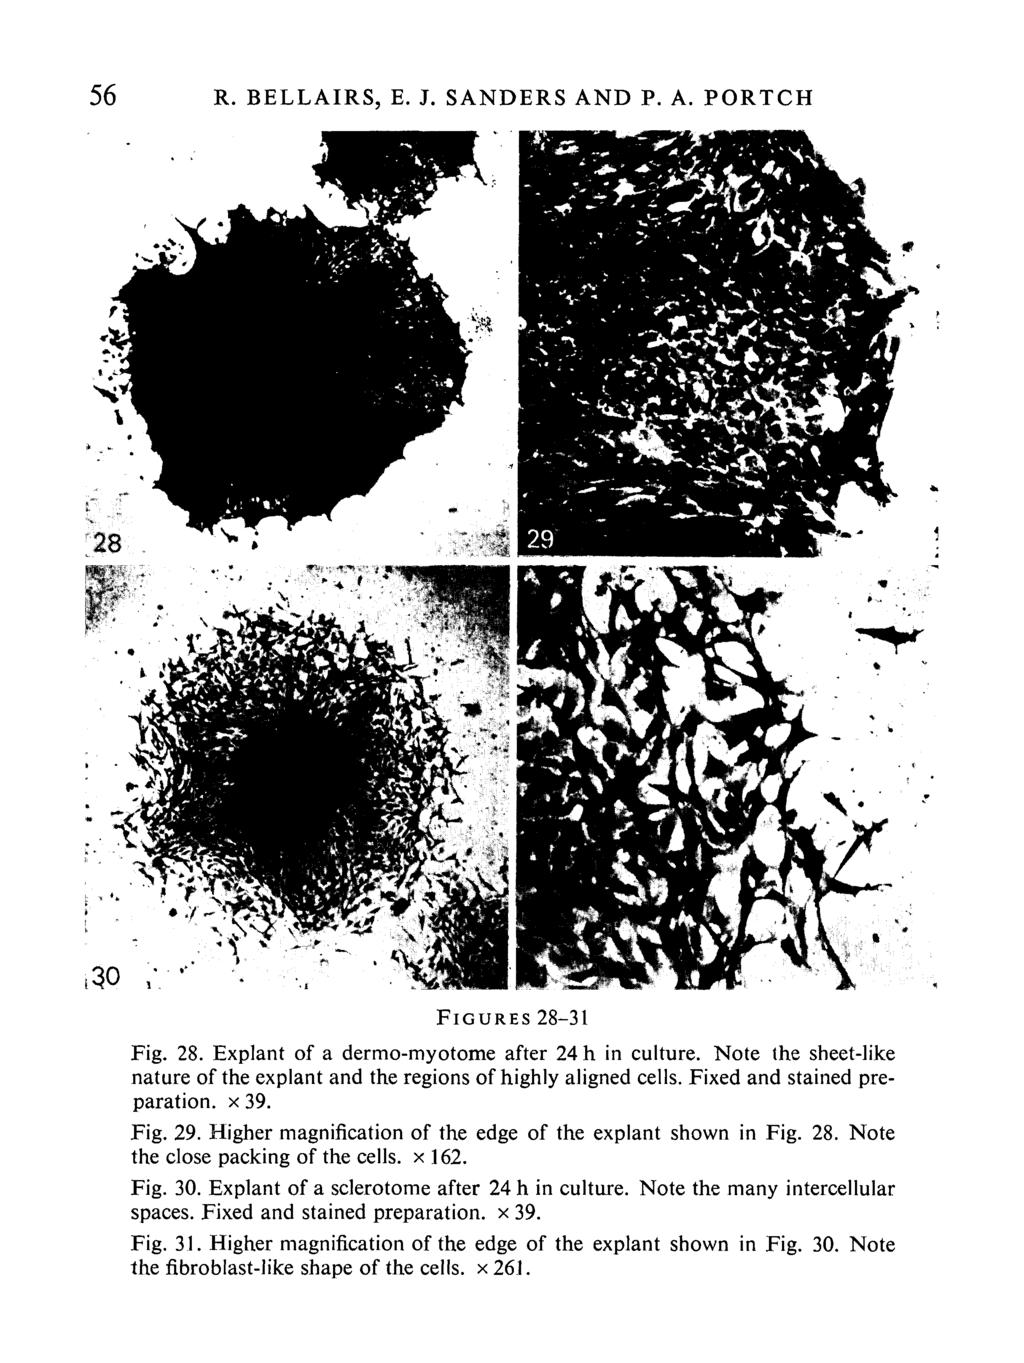 56 R. BELLAIRS, E. J. SANDERS AND P. A. PORTCH FIGURES 28-31 Fig. 28. Explant of a dermo-myotome after 24 h in culture.